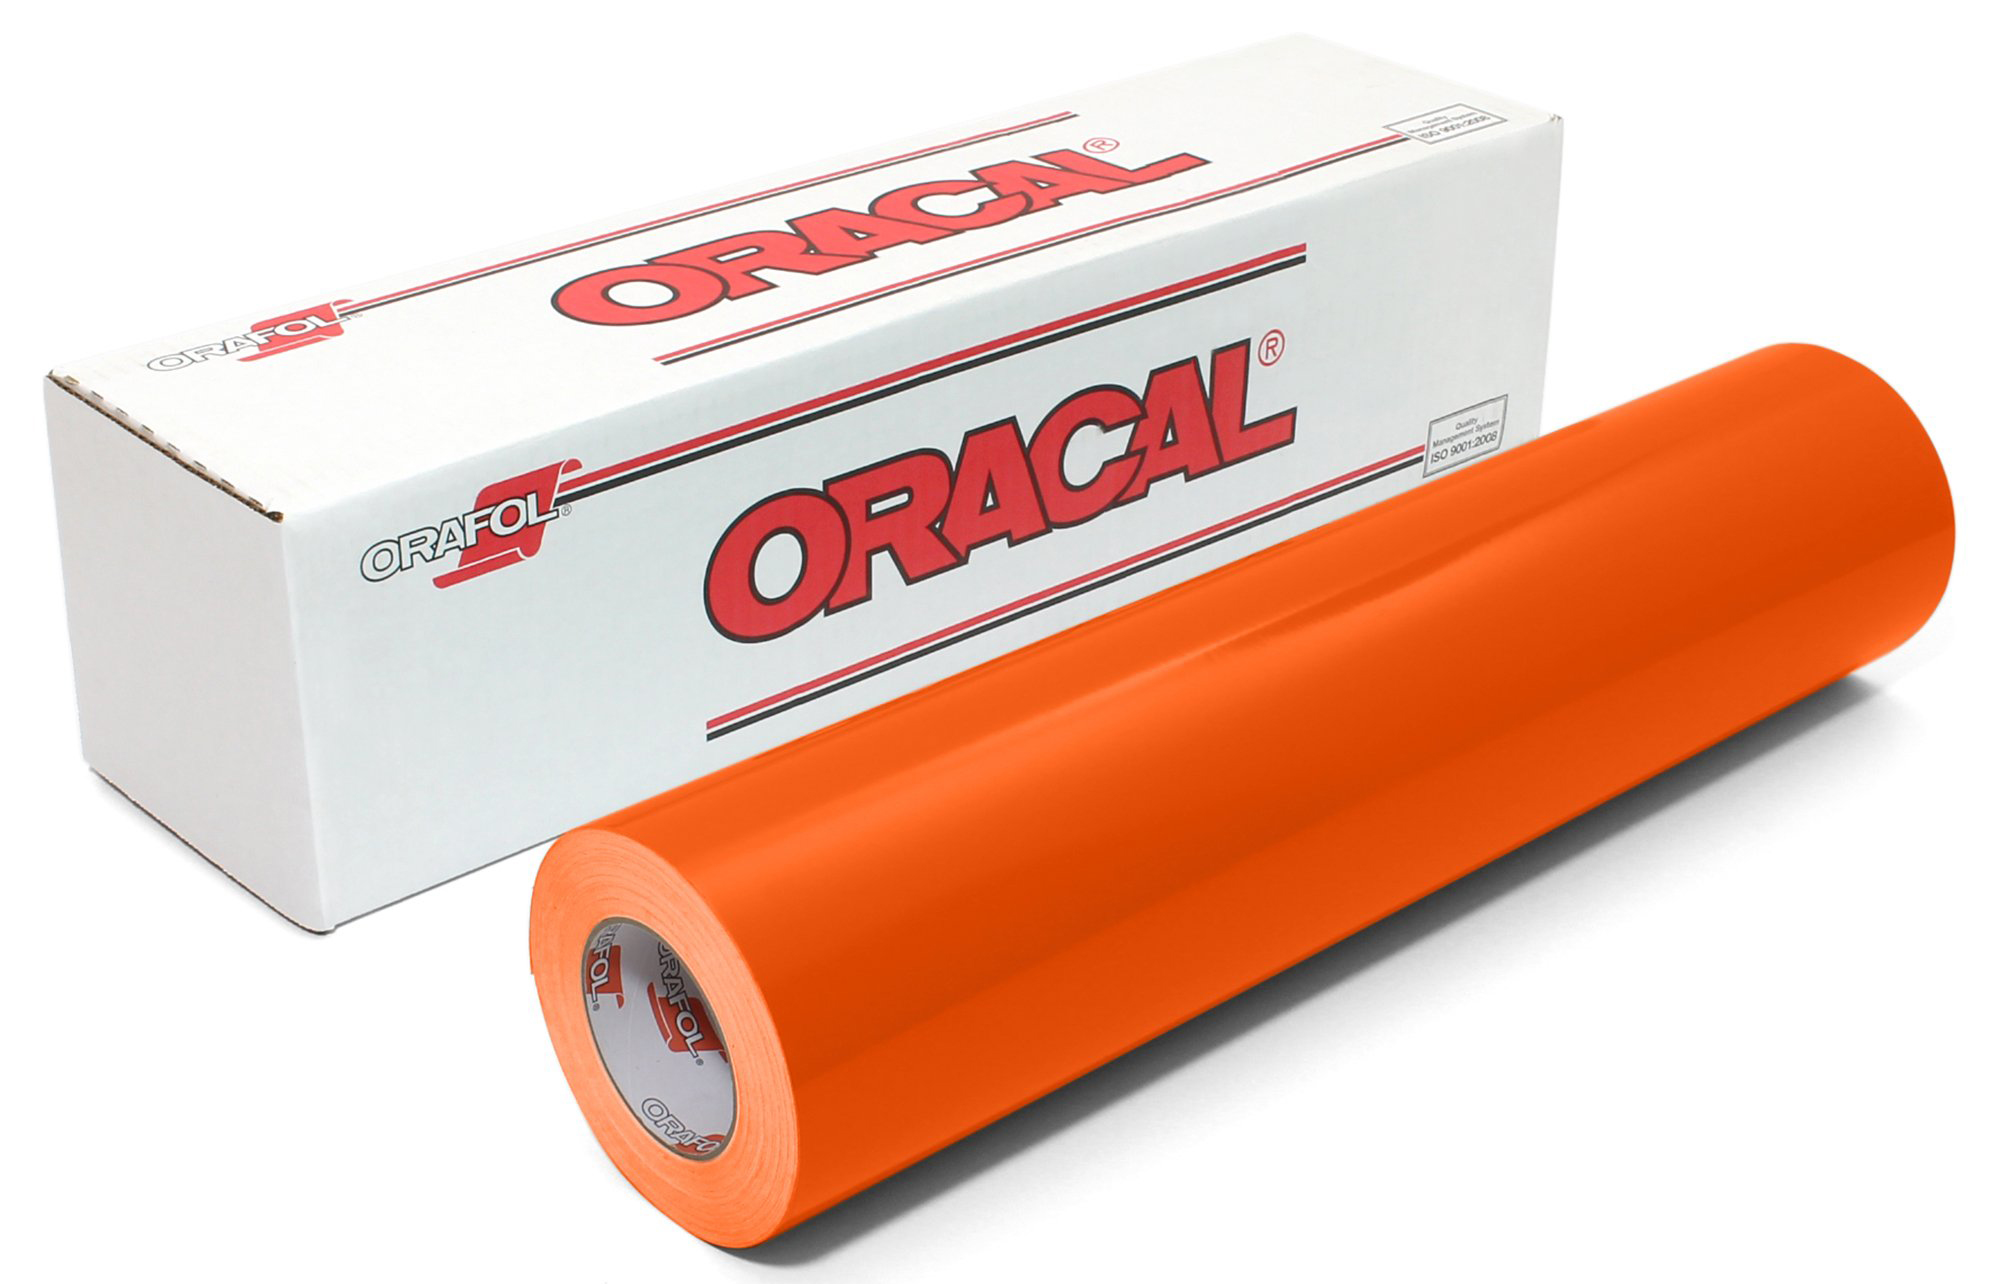 24IN ORANGE 631 EXHIBITION CAL - Oracal 631 Exhibition Calendered PVC Film